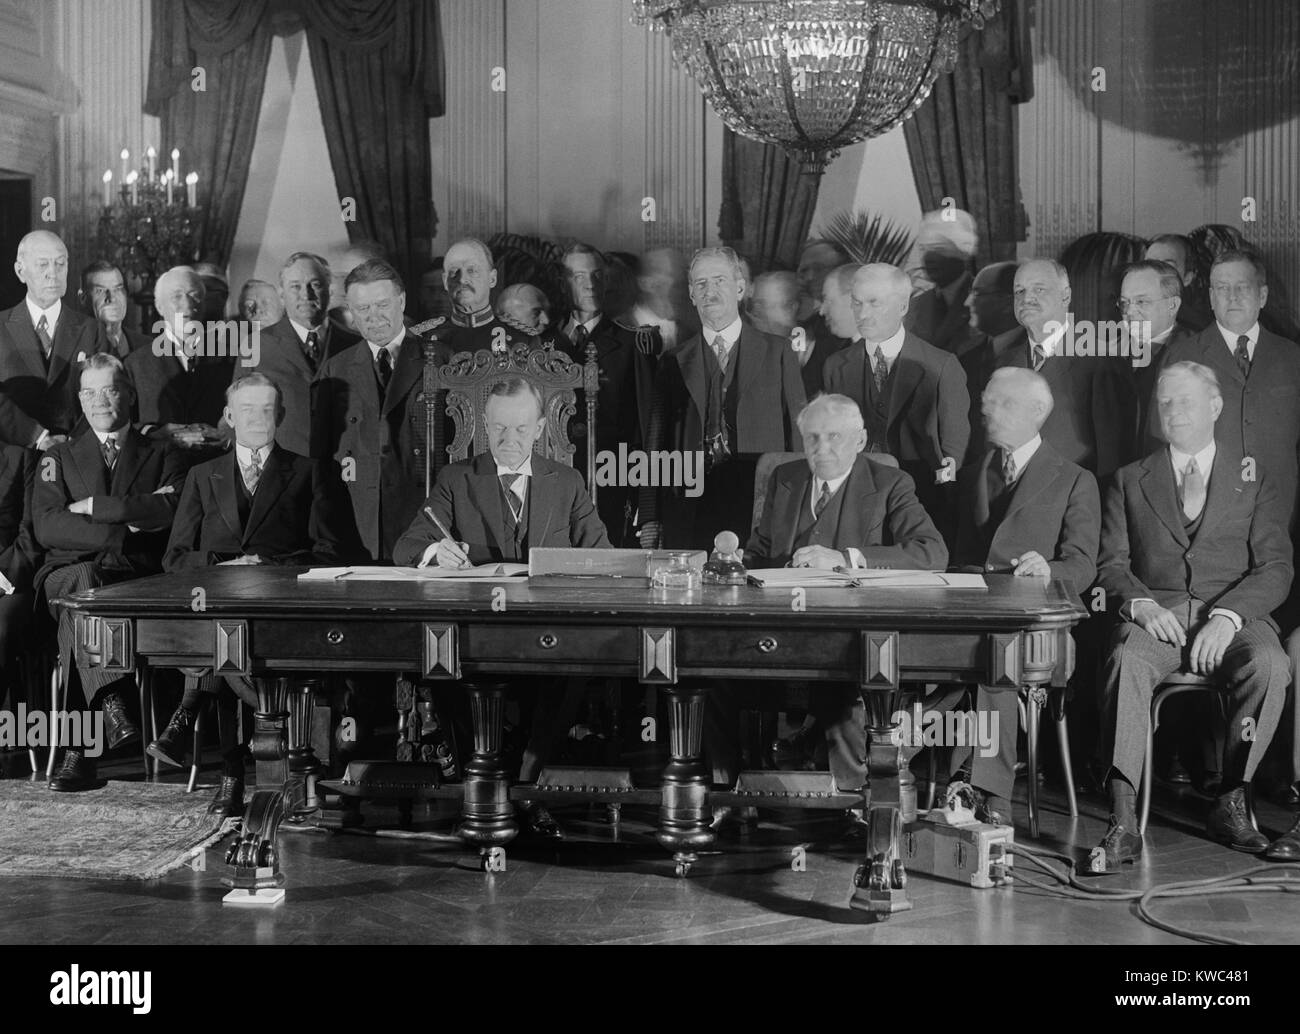 President Coolidge signs Kellogg Treaty in the East Room of the White House on Jan. 17, 1929. Kellogg-Briand Pact was an multi-national agreement to outlaw war. At table, L-R: Vice President Dawes, Pres. Coolidge, Sec. of State Frank Kellogg. (BSLOC 2015 15 123) Stock Photo